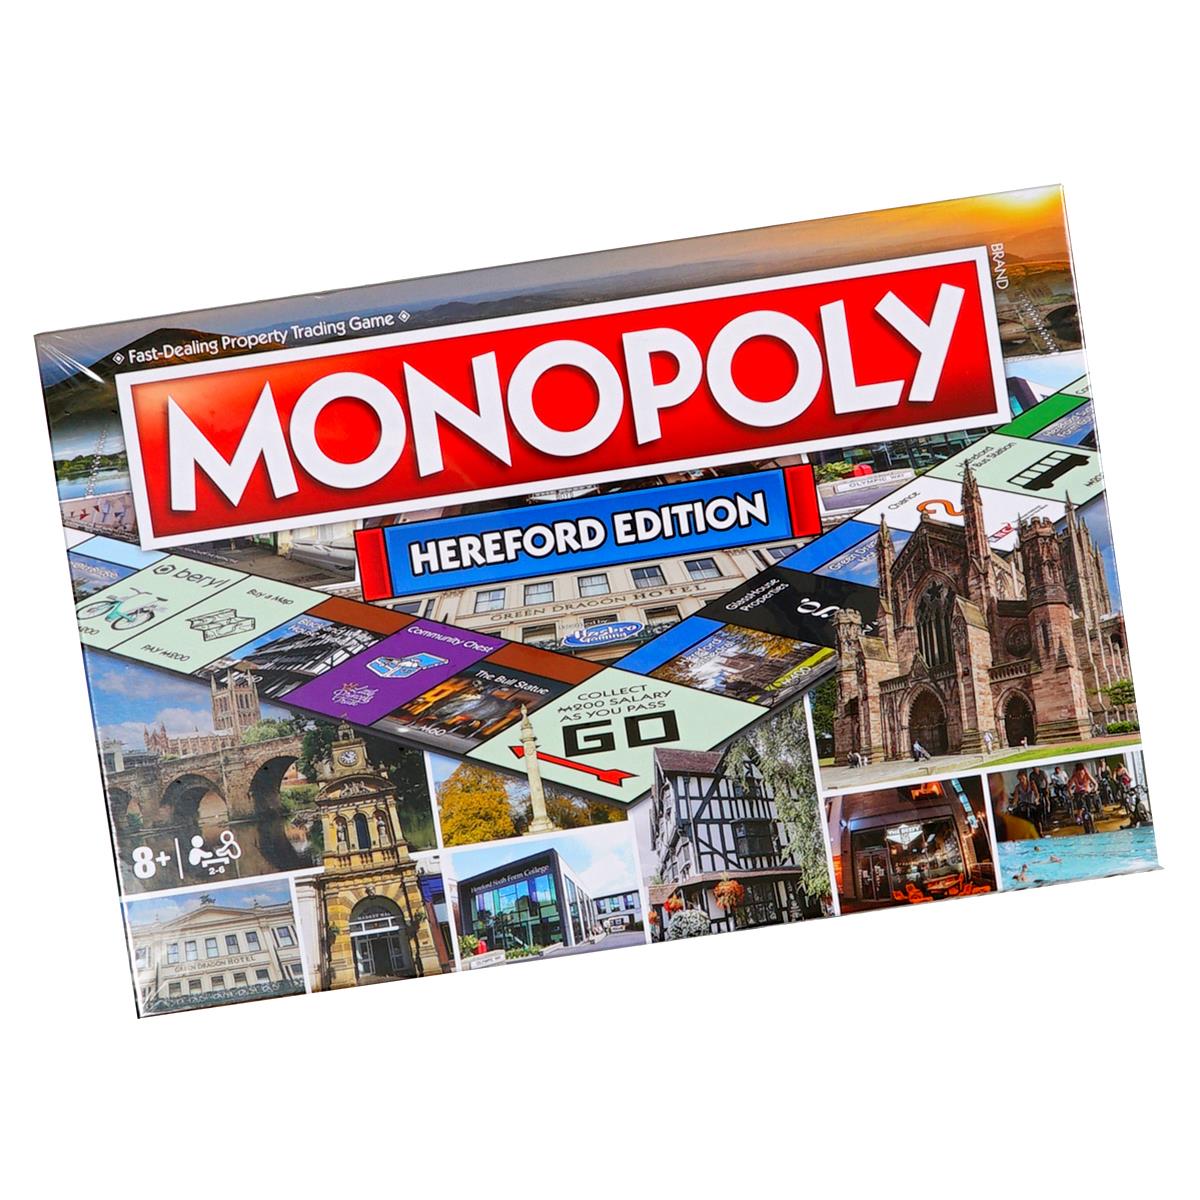 Monopoly Hereford Special Edition Board Game Questions & Answers